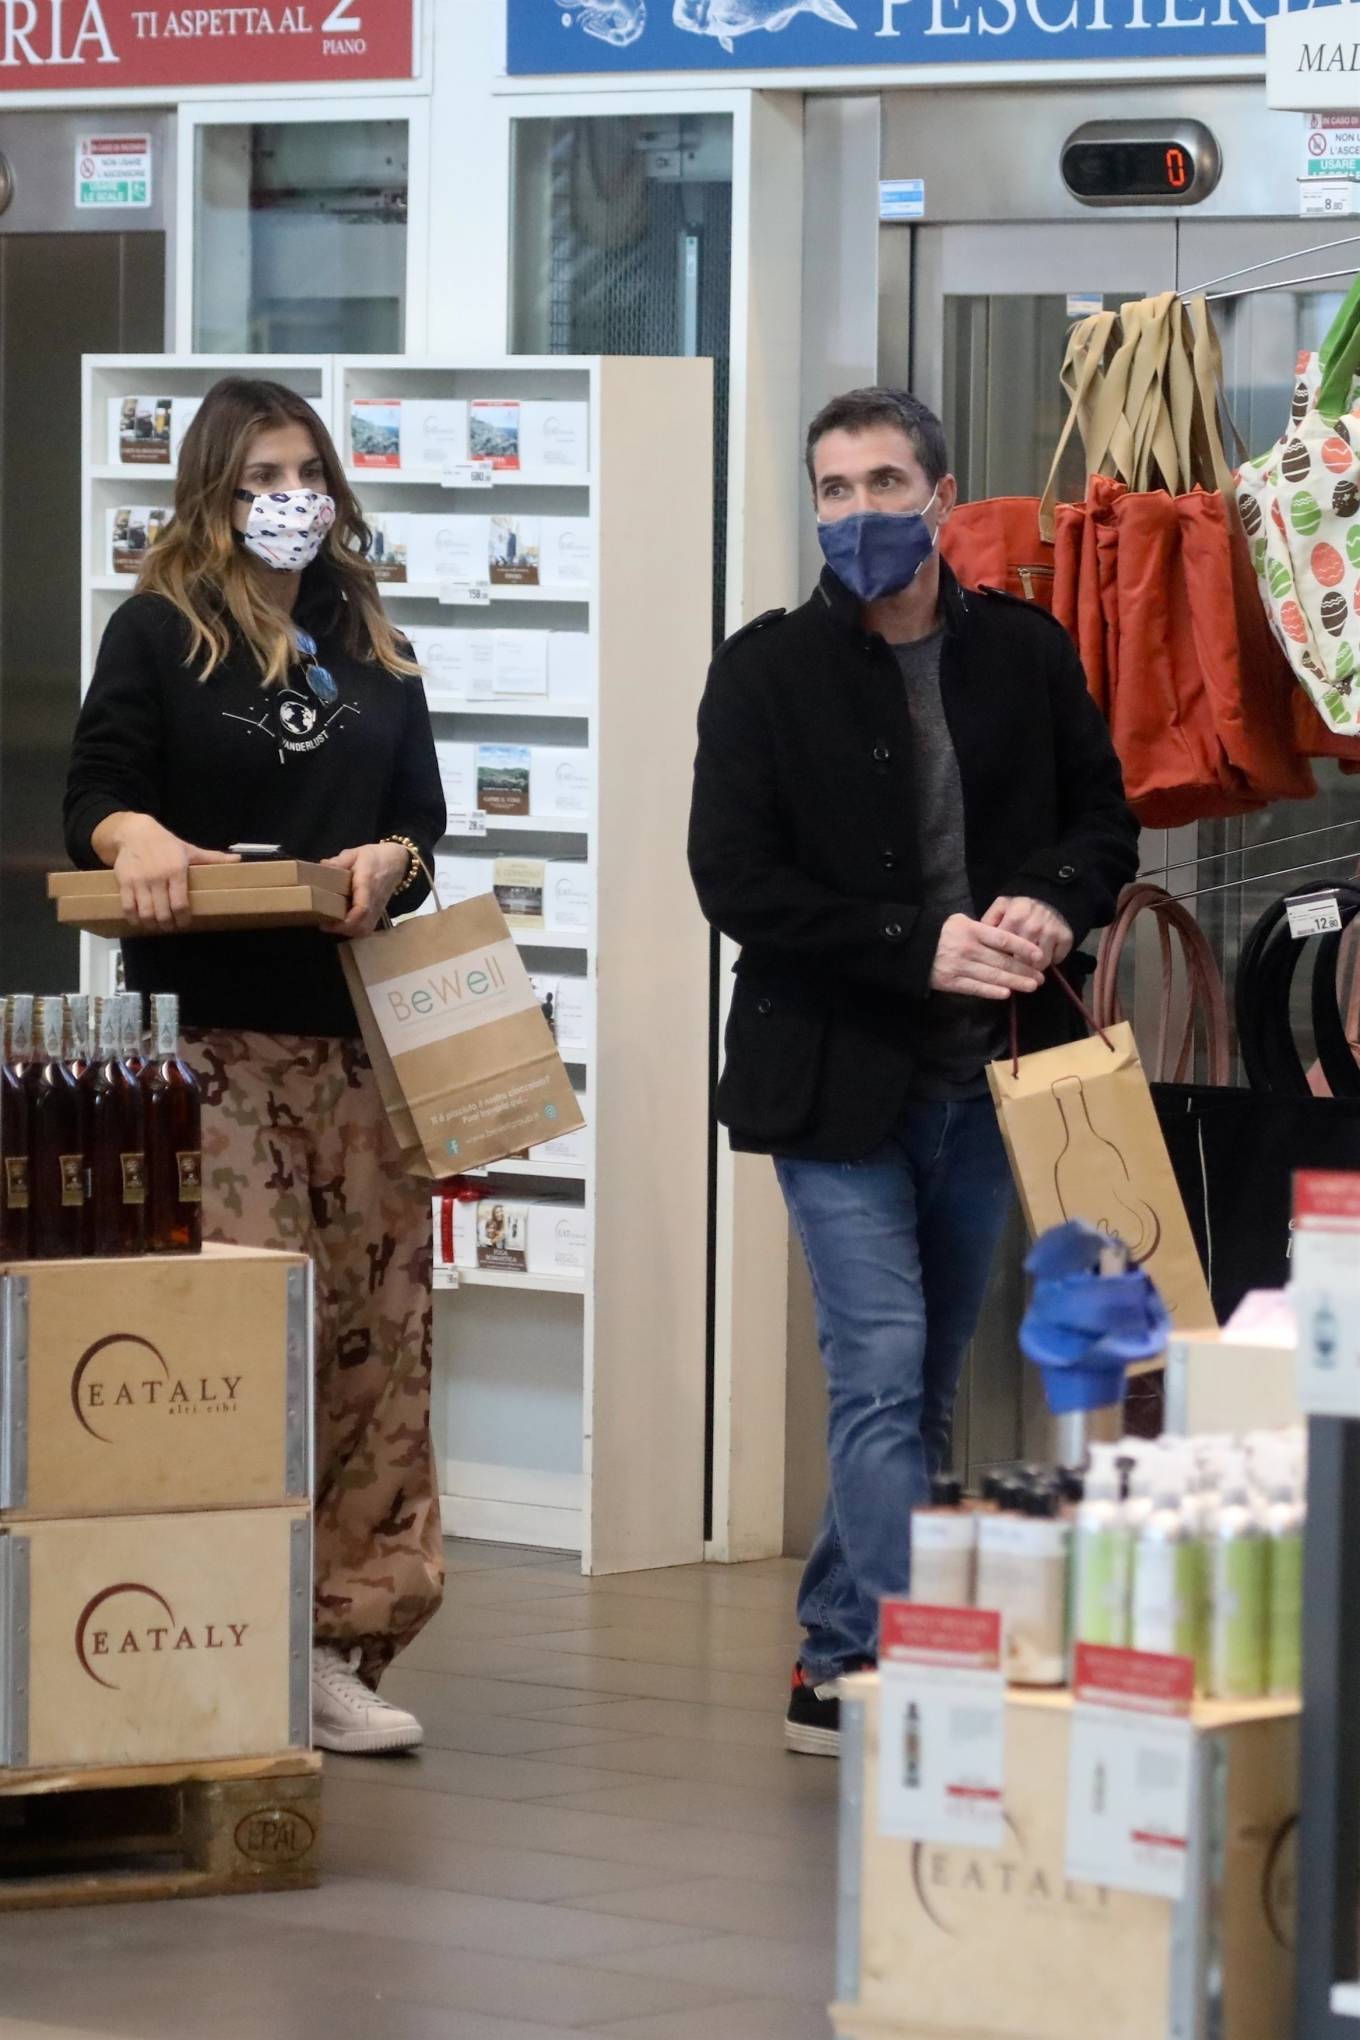 Elisabetta Canalis - Shopping candids in Rome